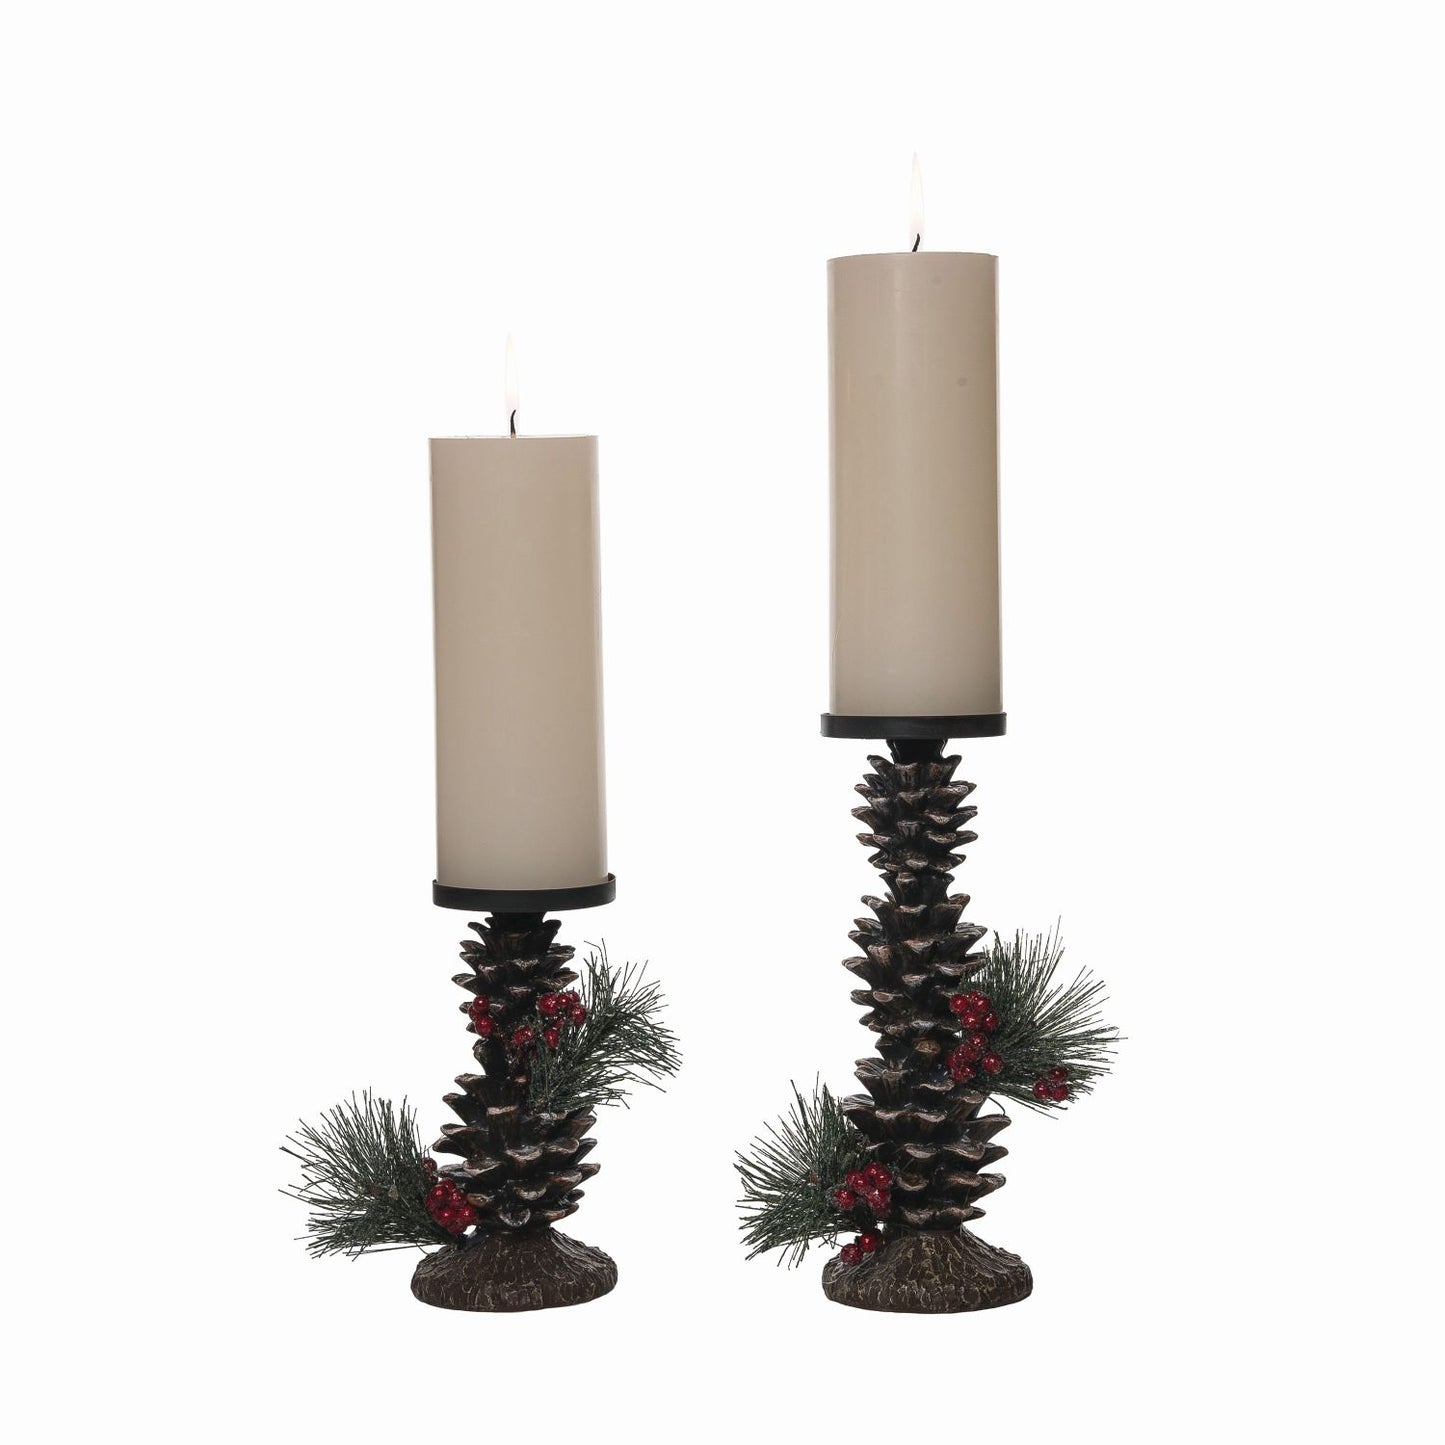 Transpac Resin Rustic Pinecone Candle Holders, Set Of 2